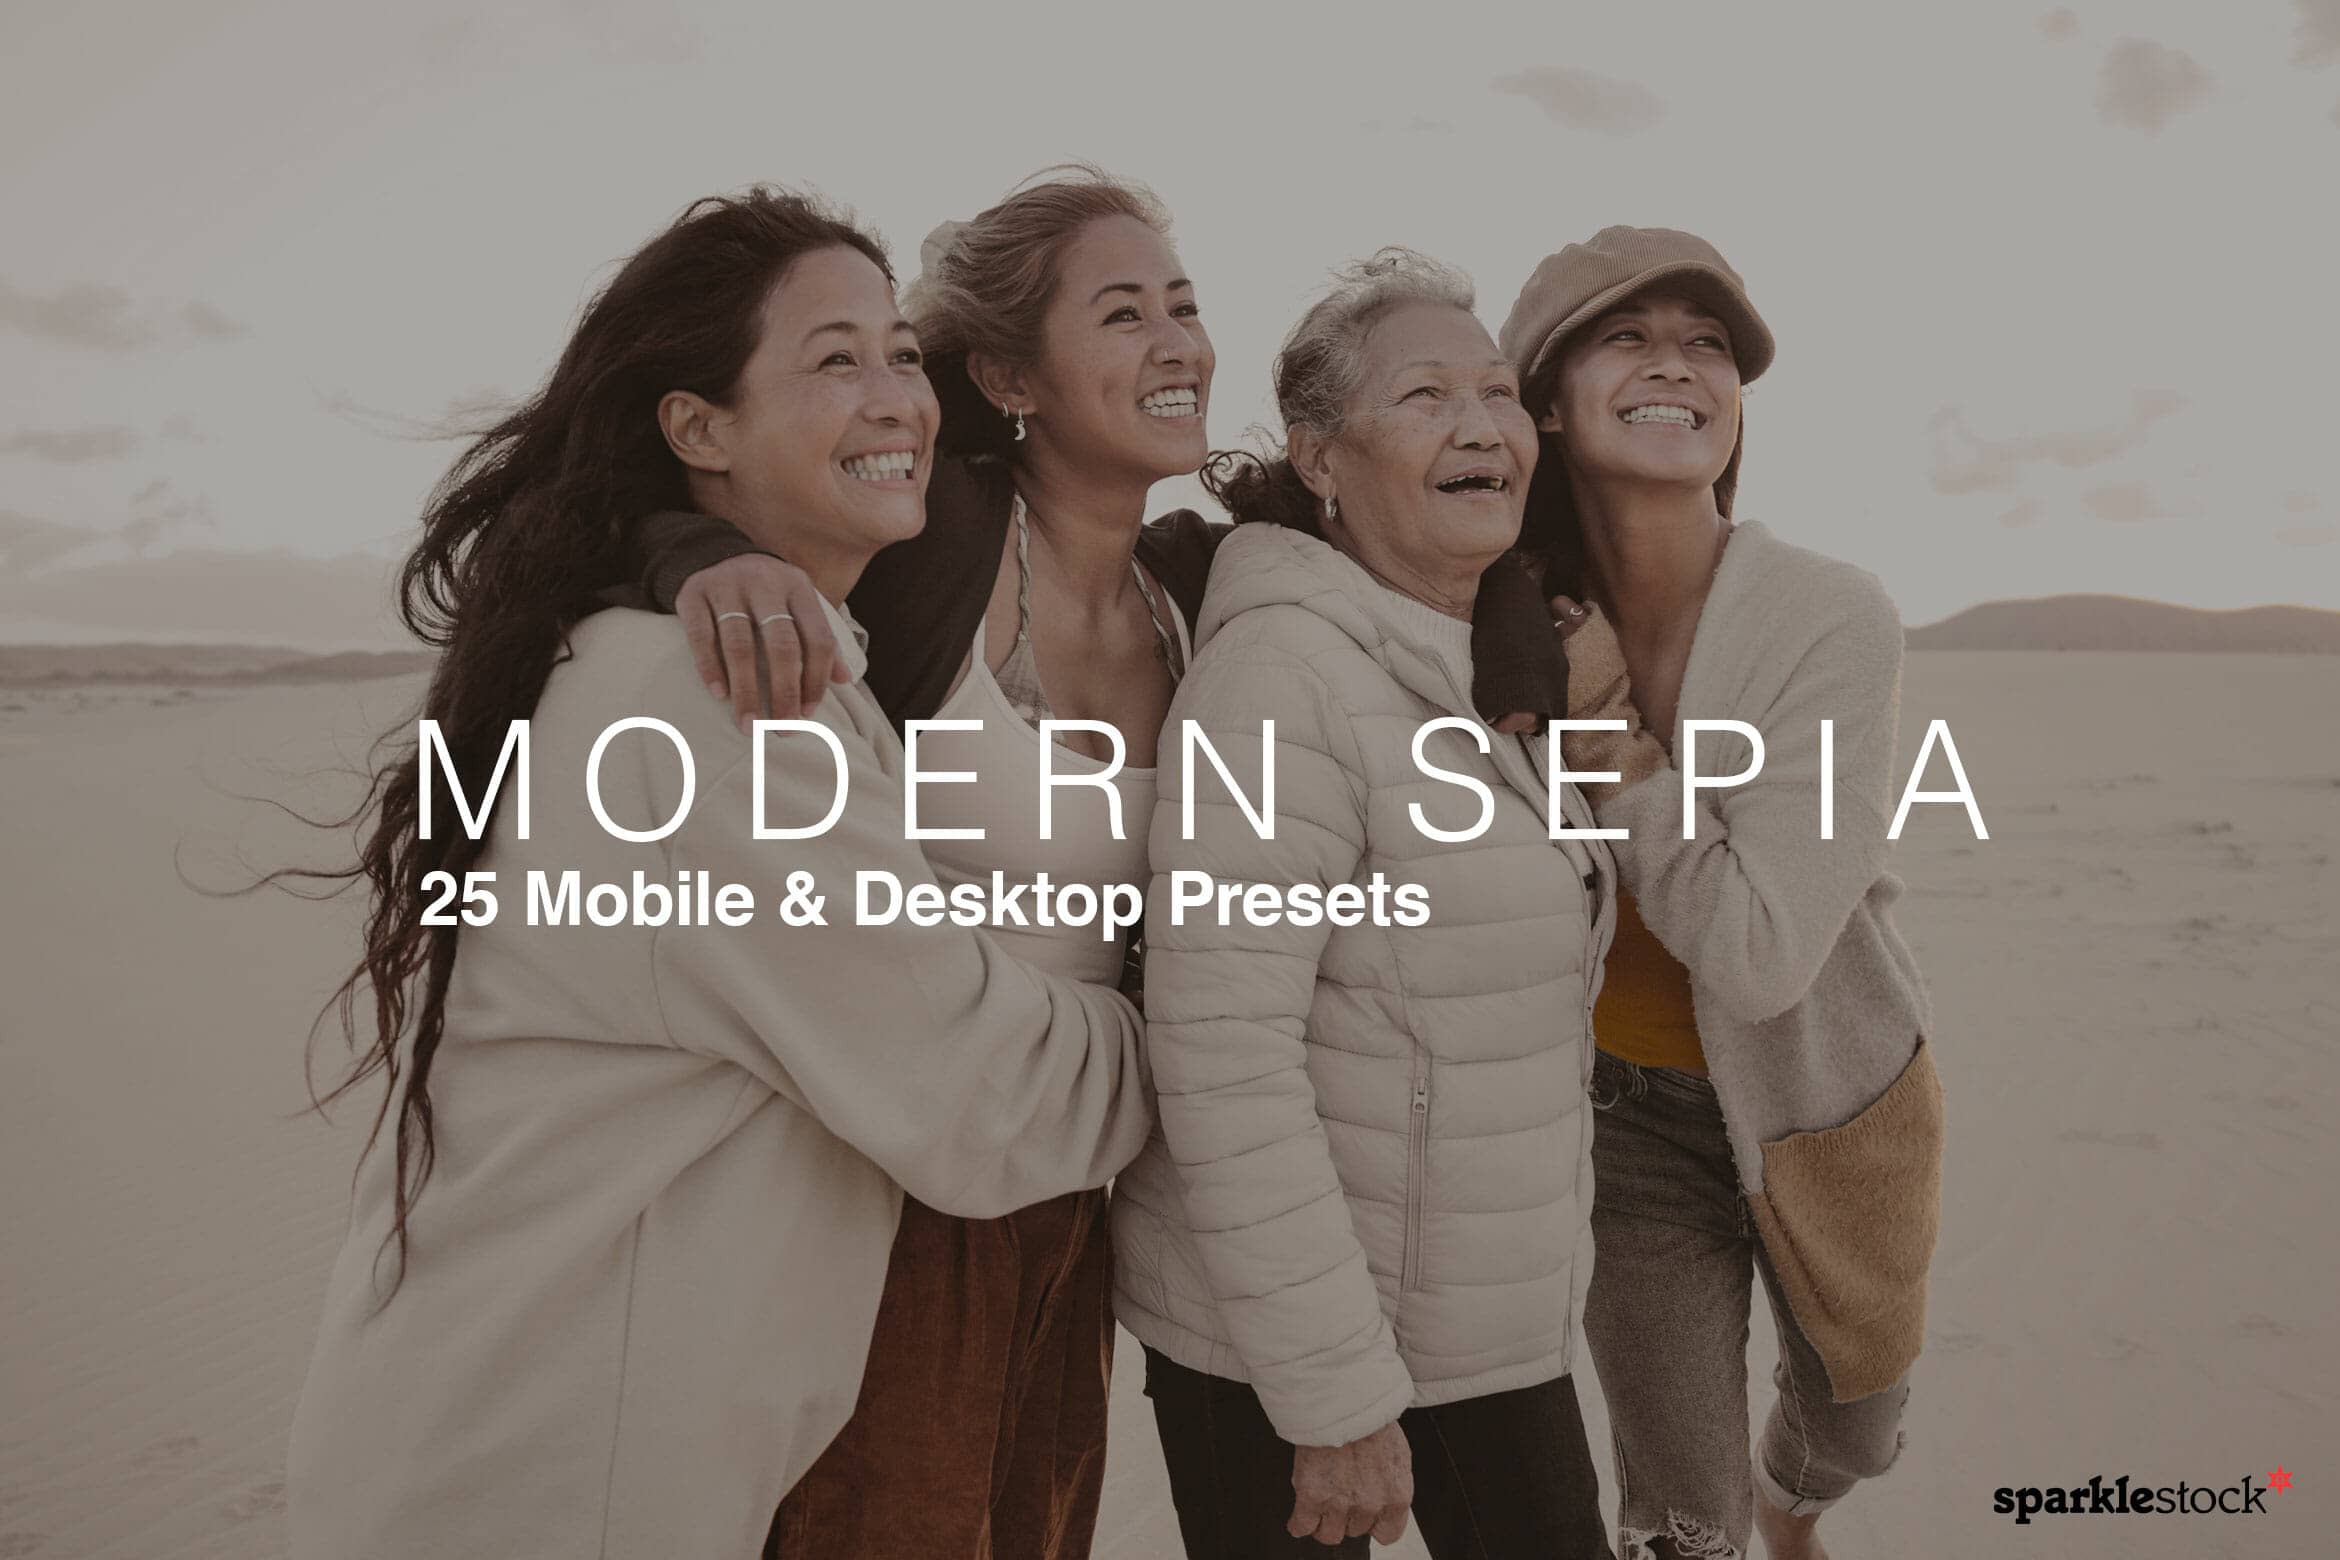 10 Free Modern Sepia Lightroom Presets and LUTs